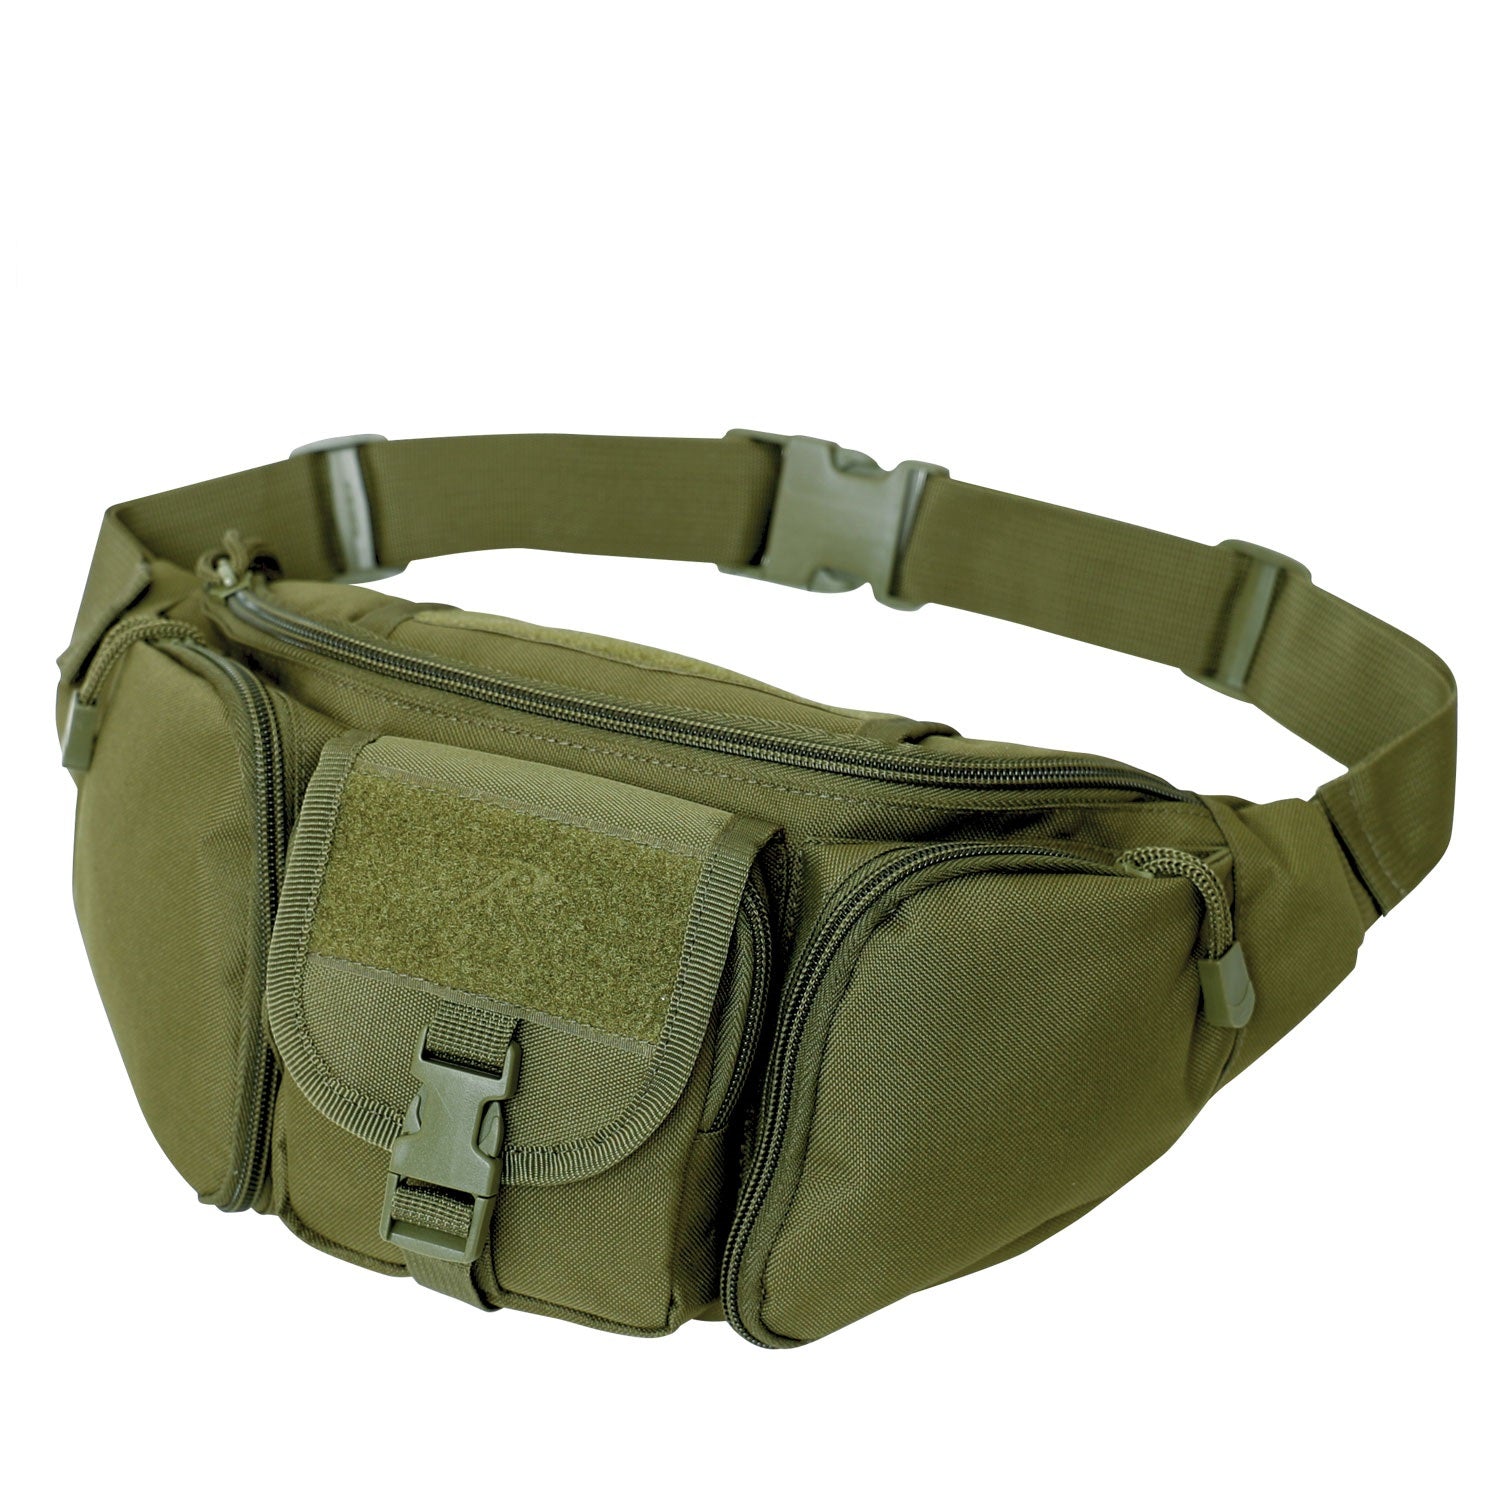 Rothco Tactical Concealed Carry Waist Pack Olive Drab